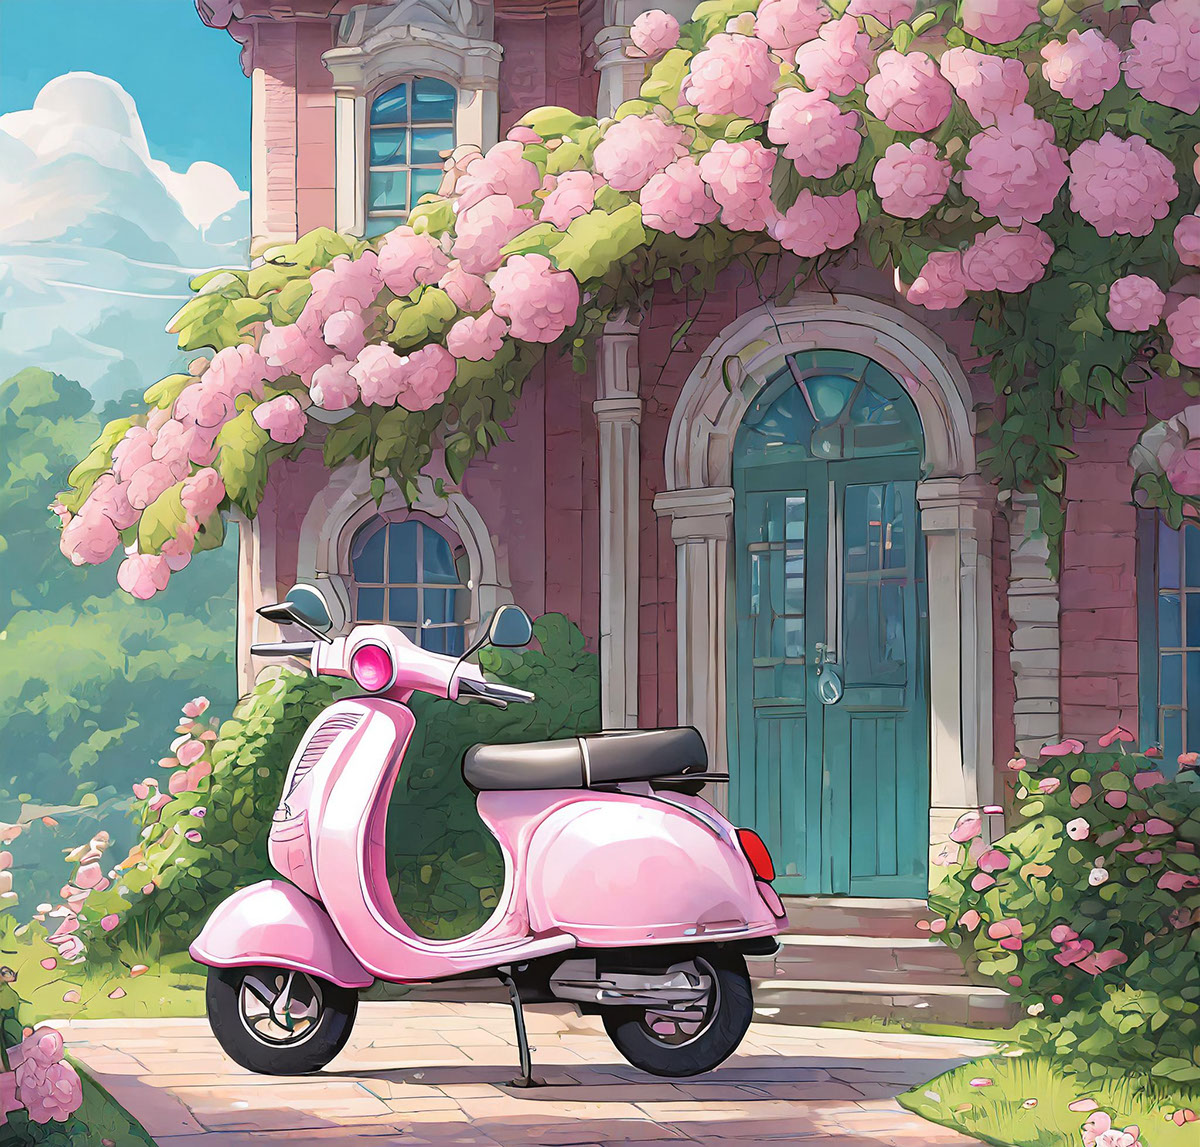 My Pink Scooter rendition image